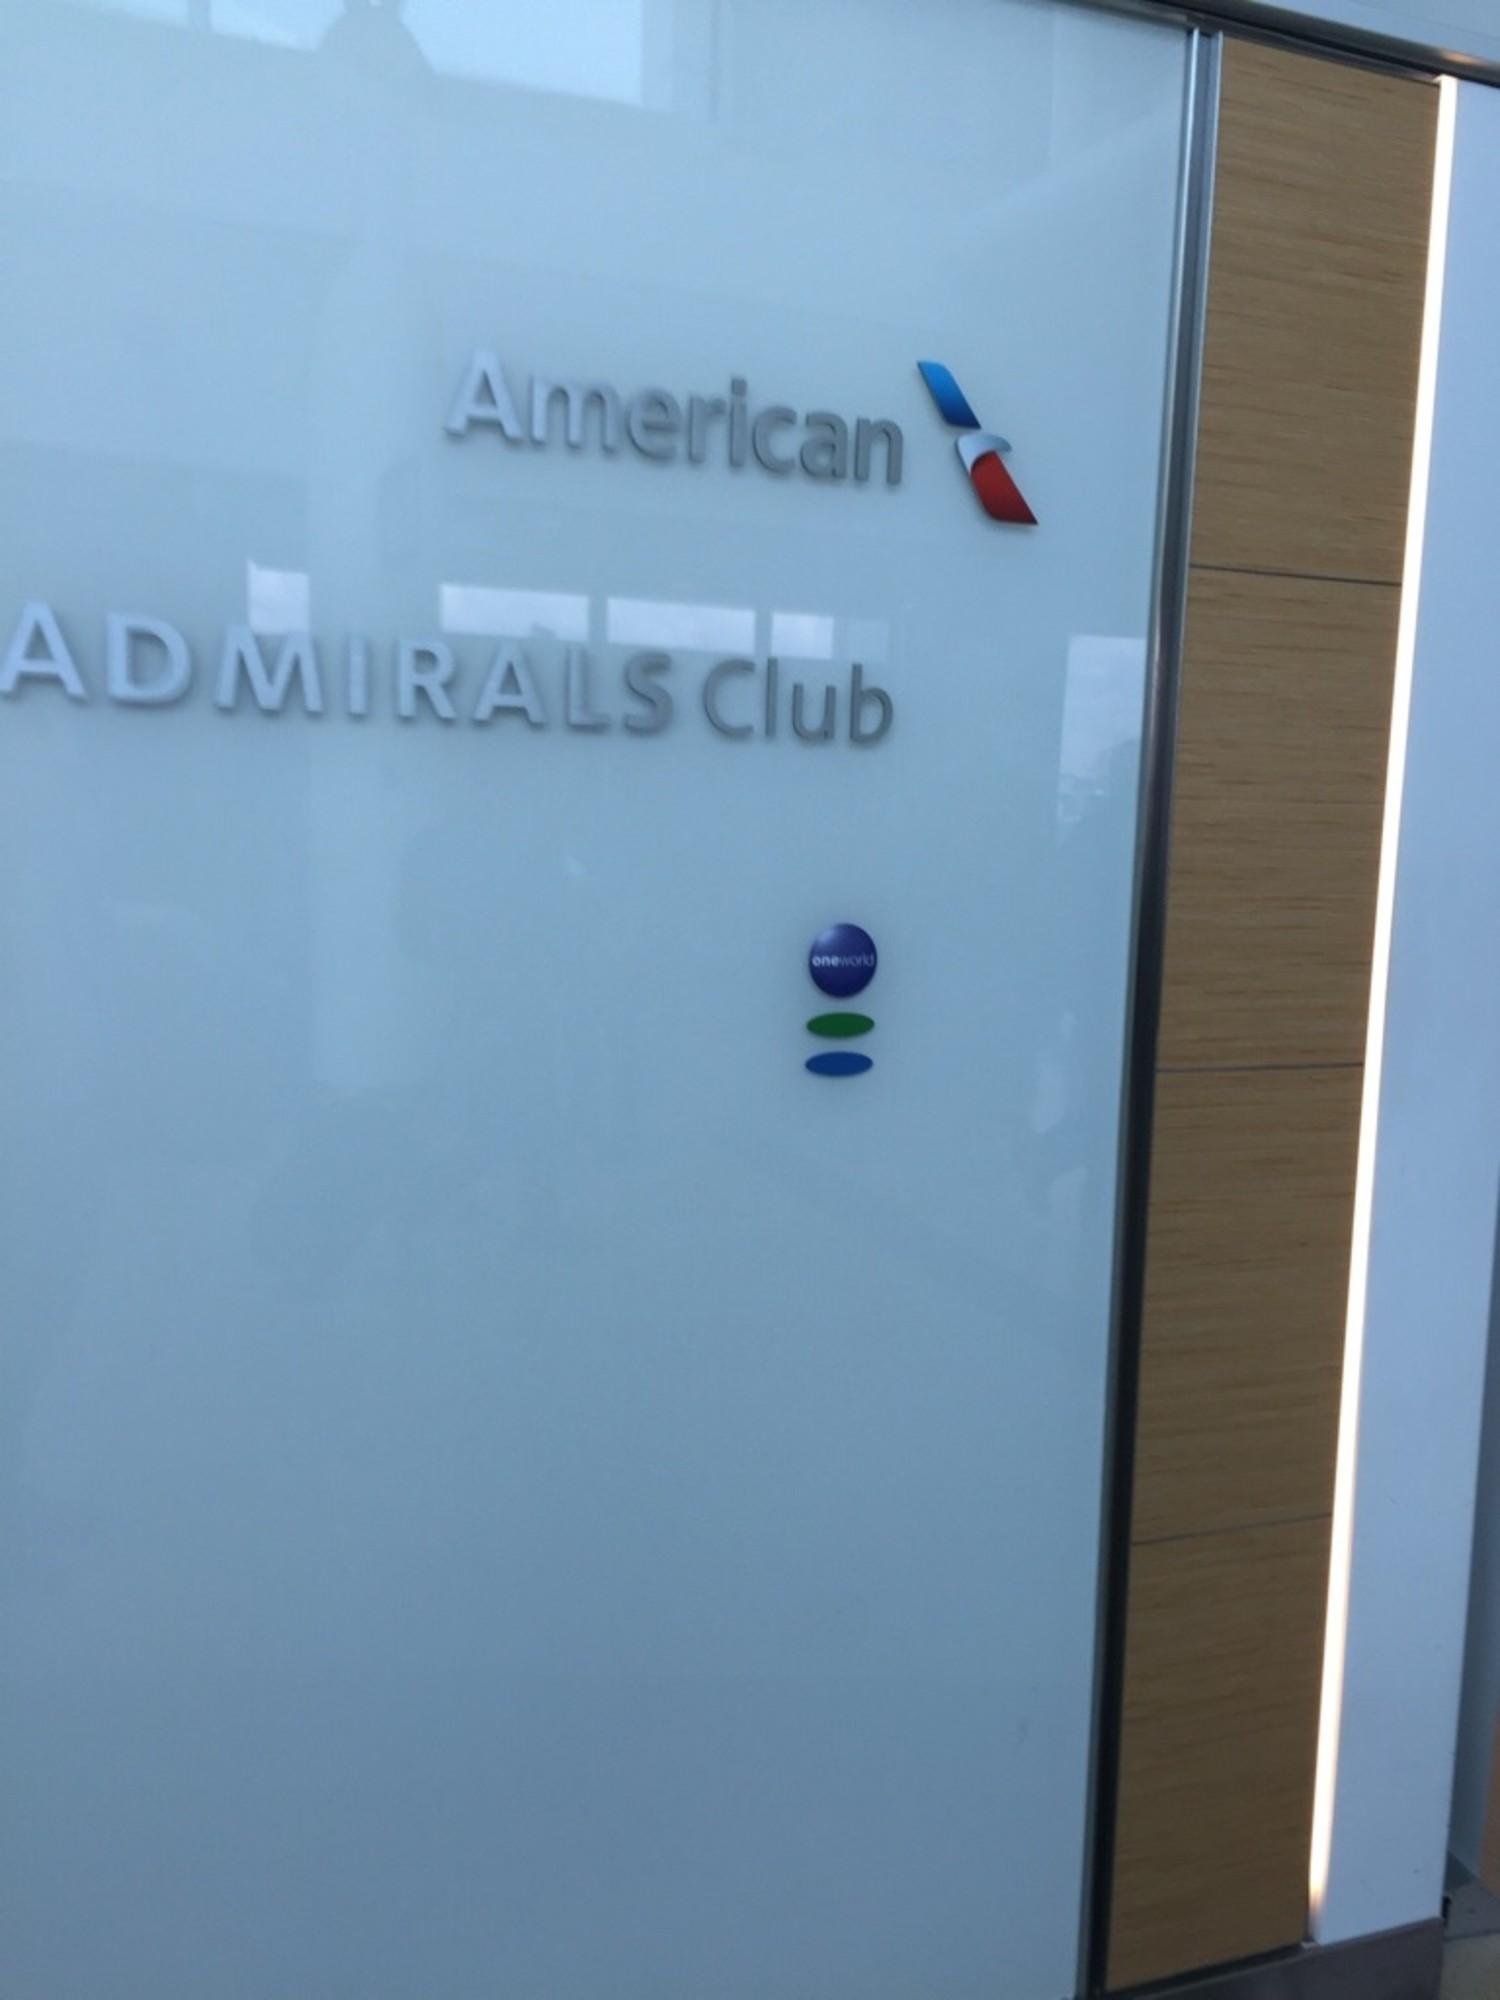 American Airlines Admirals Club image 40 of 50